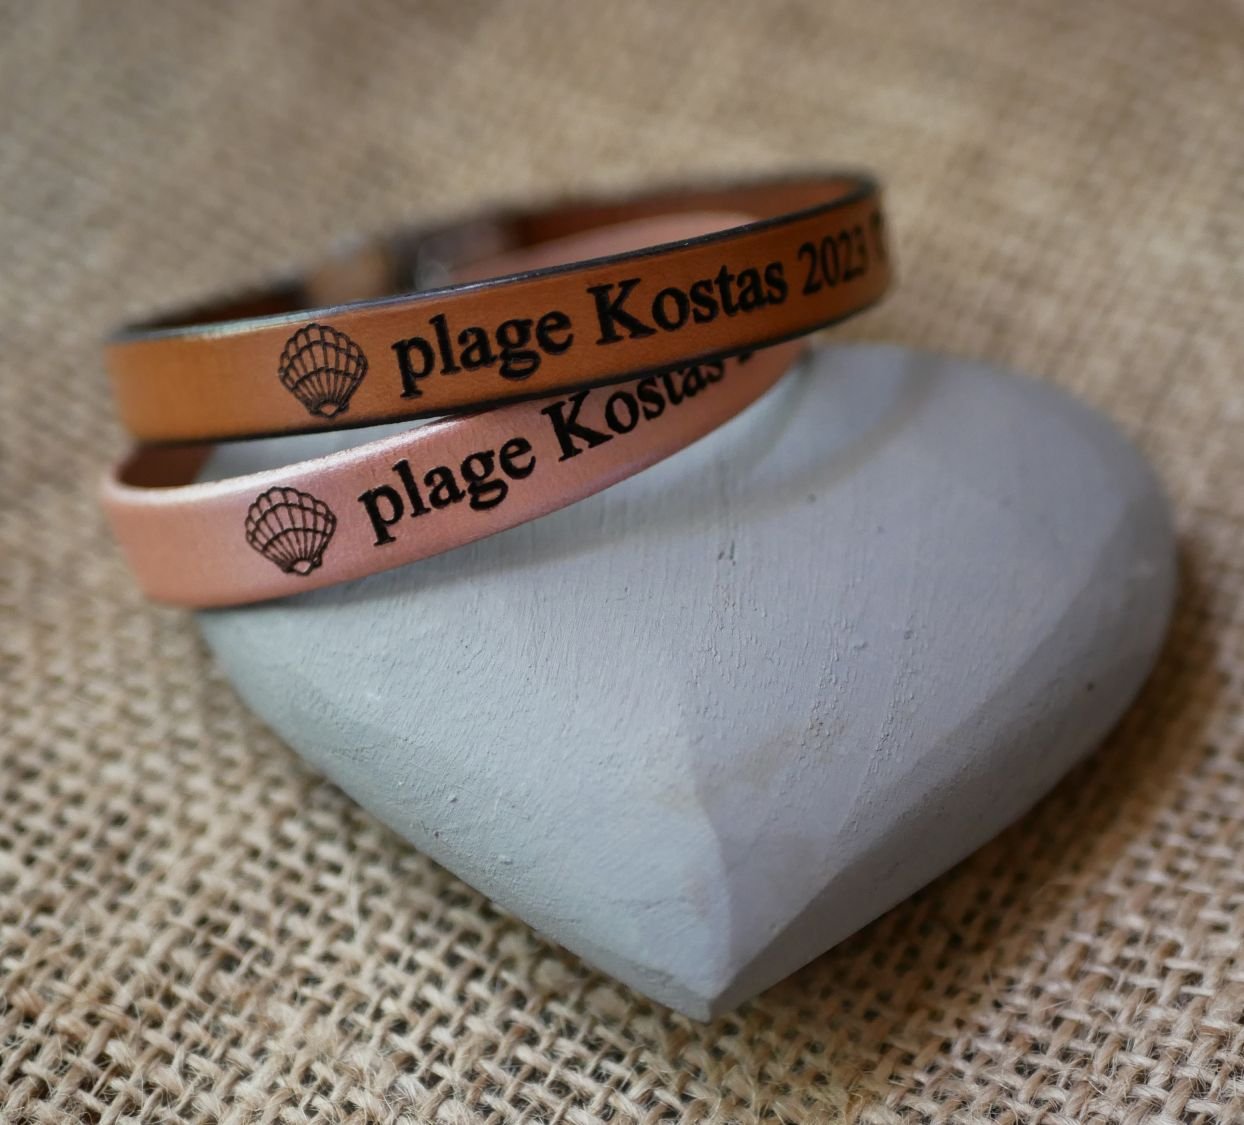 Gourmet gift for couples: 2 personalized leather bracelets by engraving 